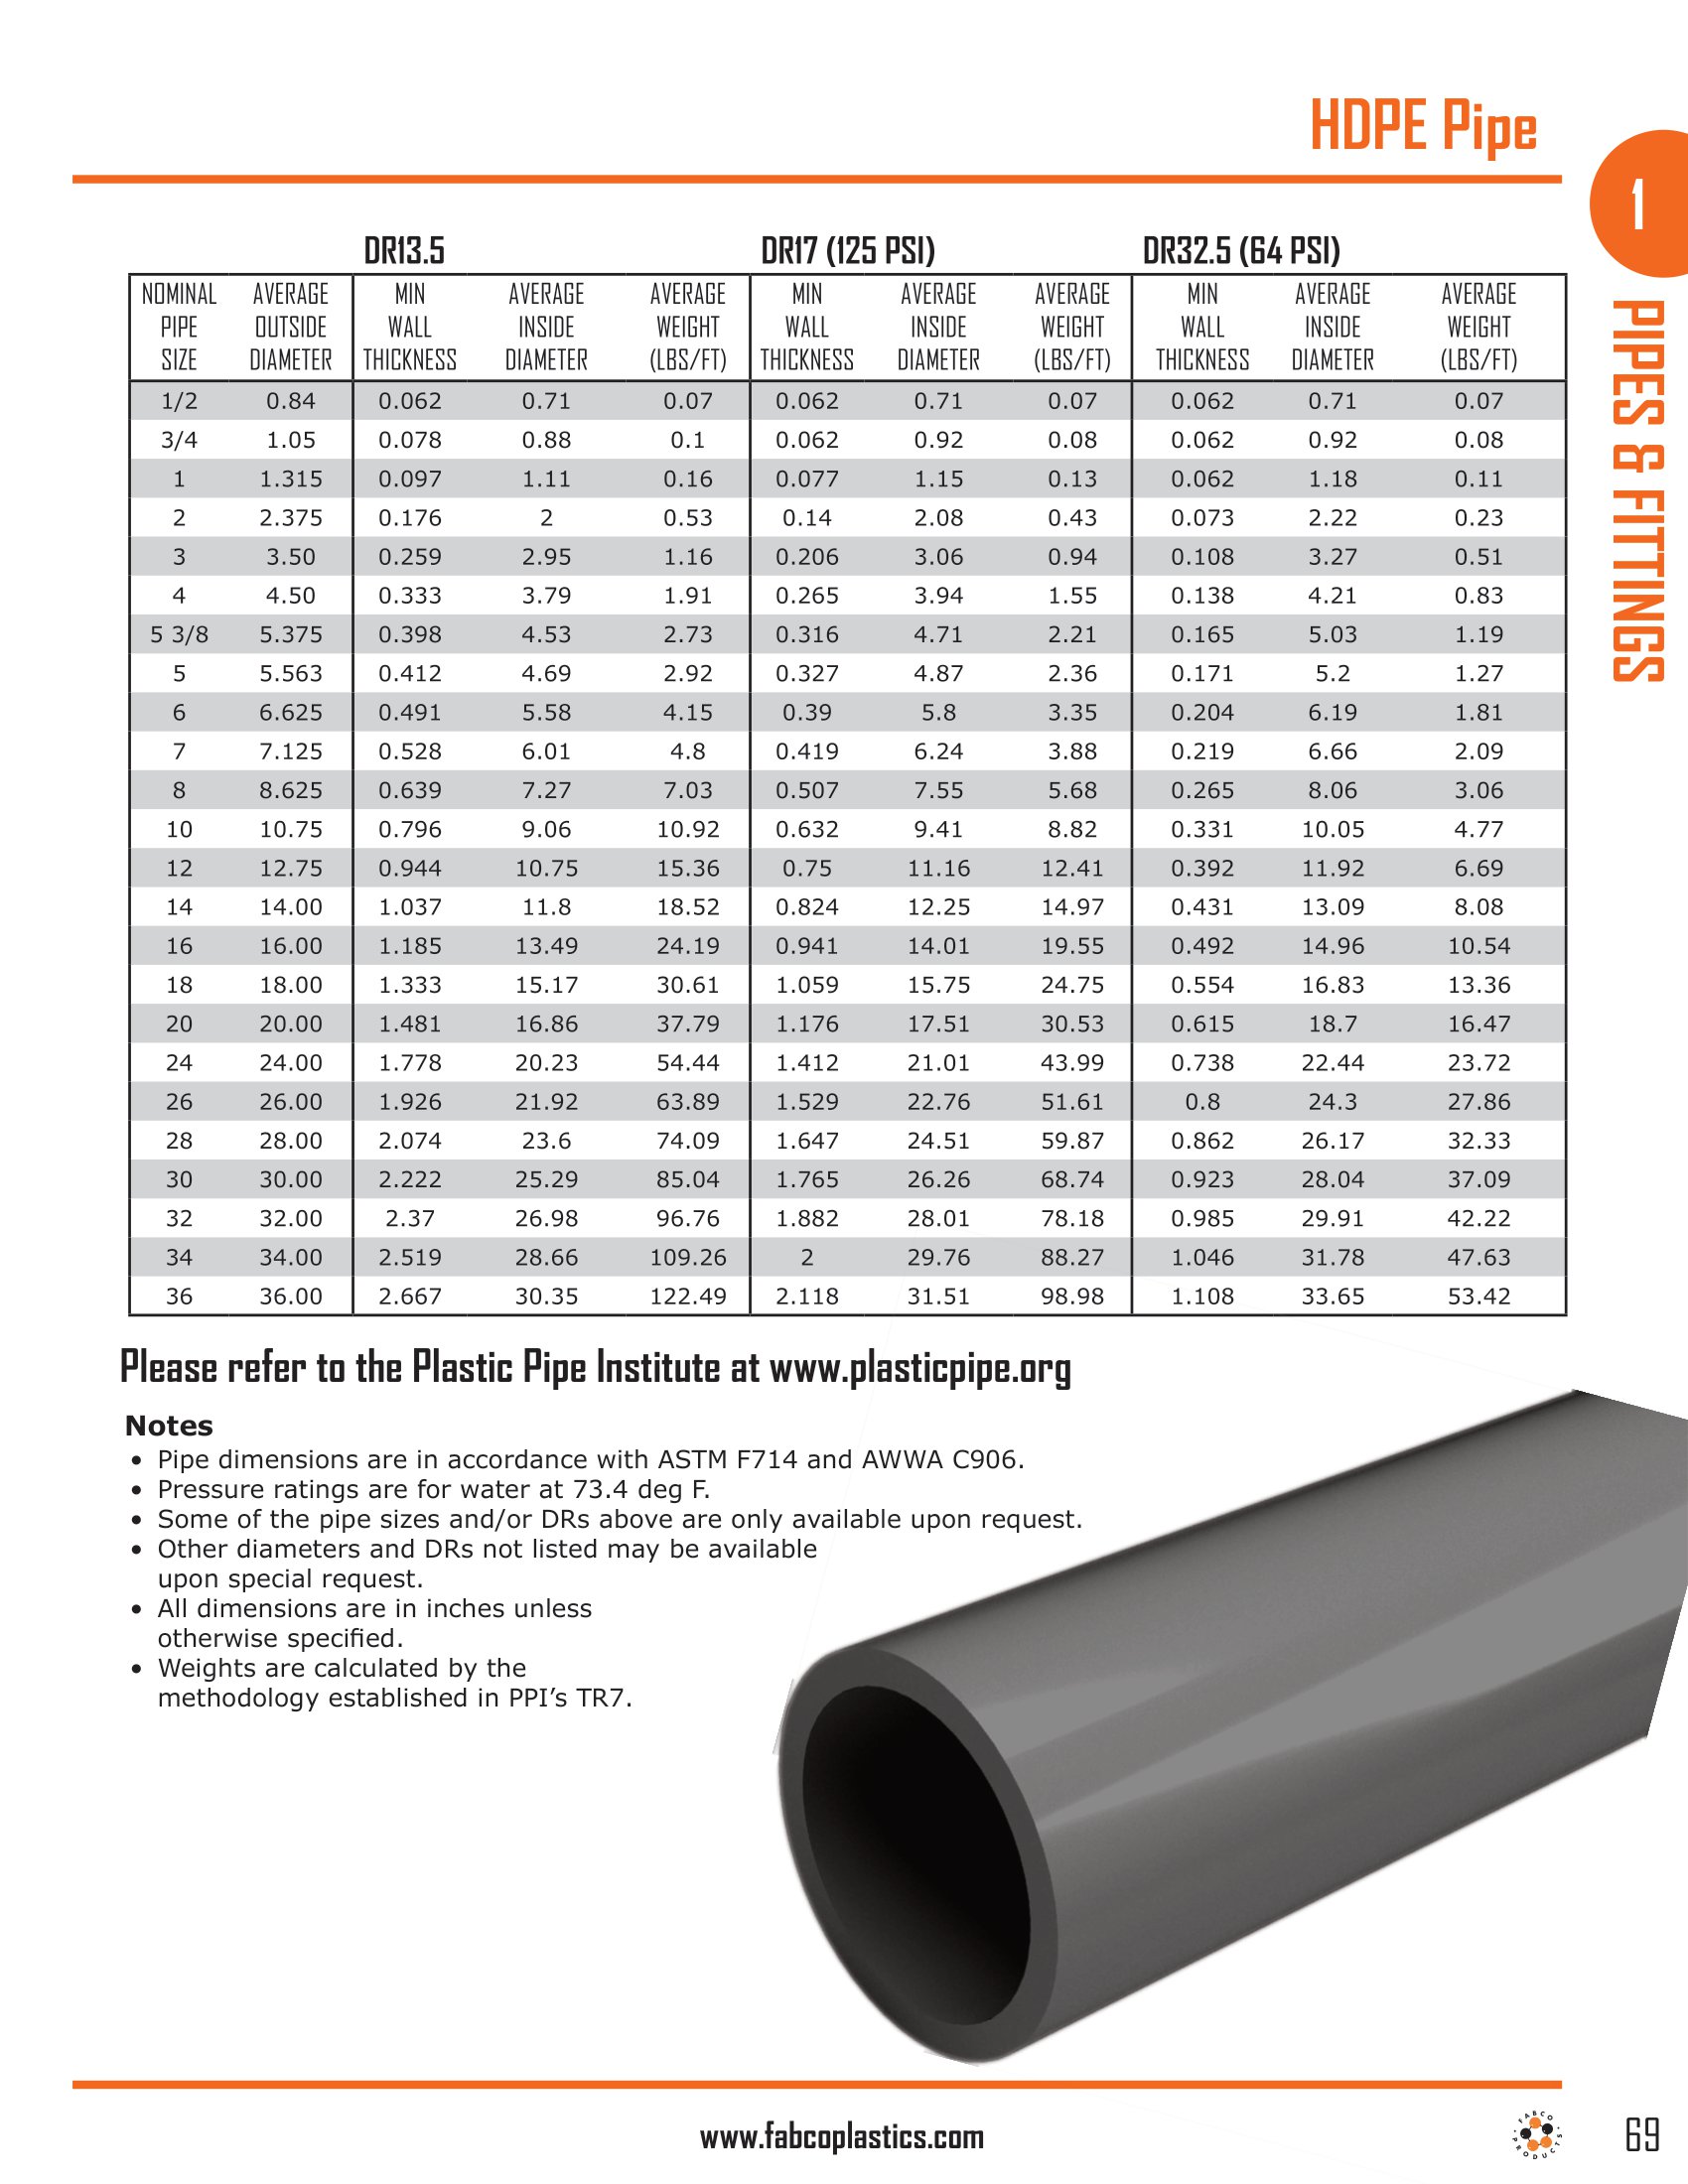 sdr pipe chart